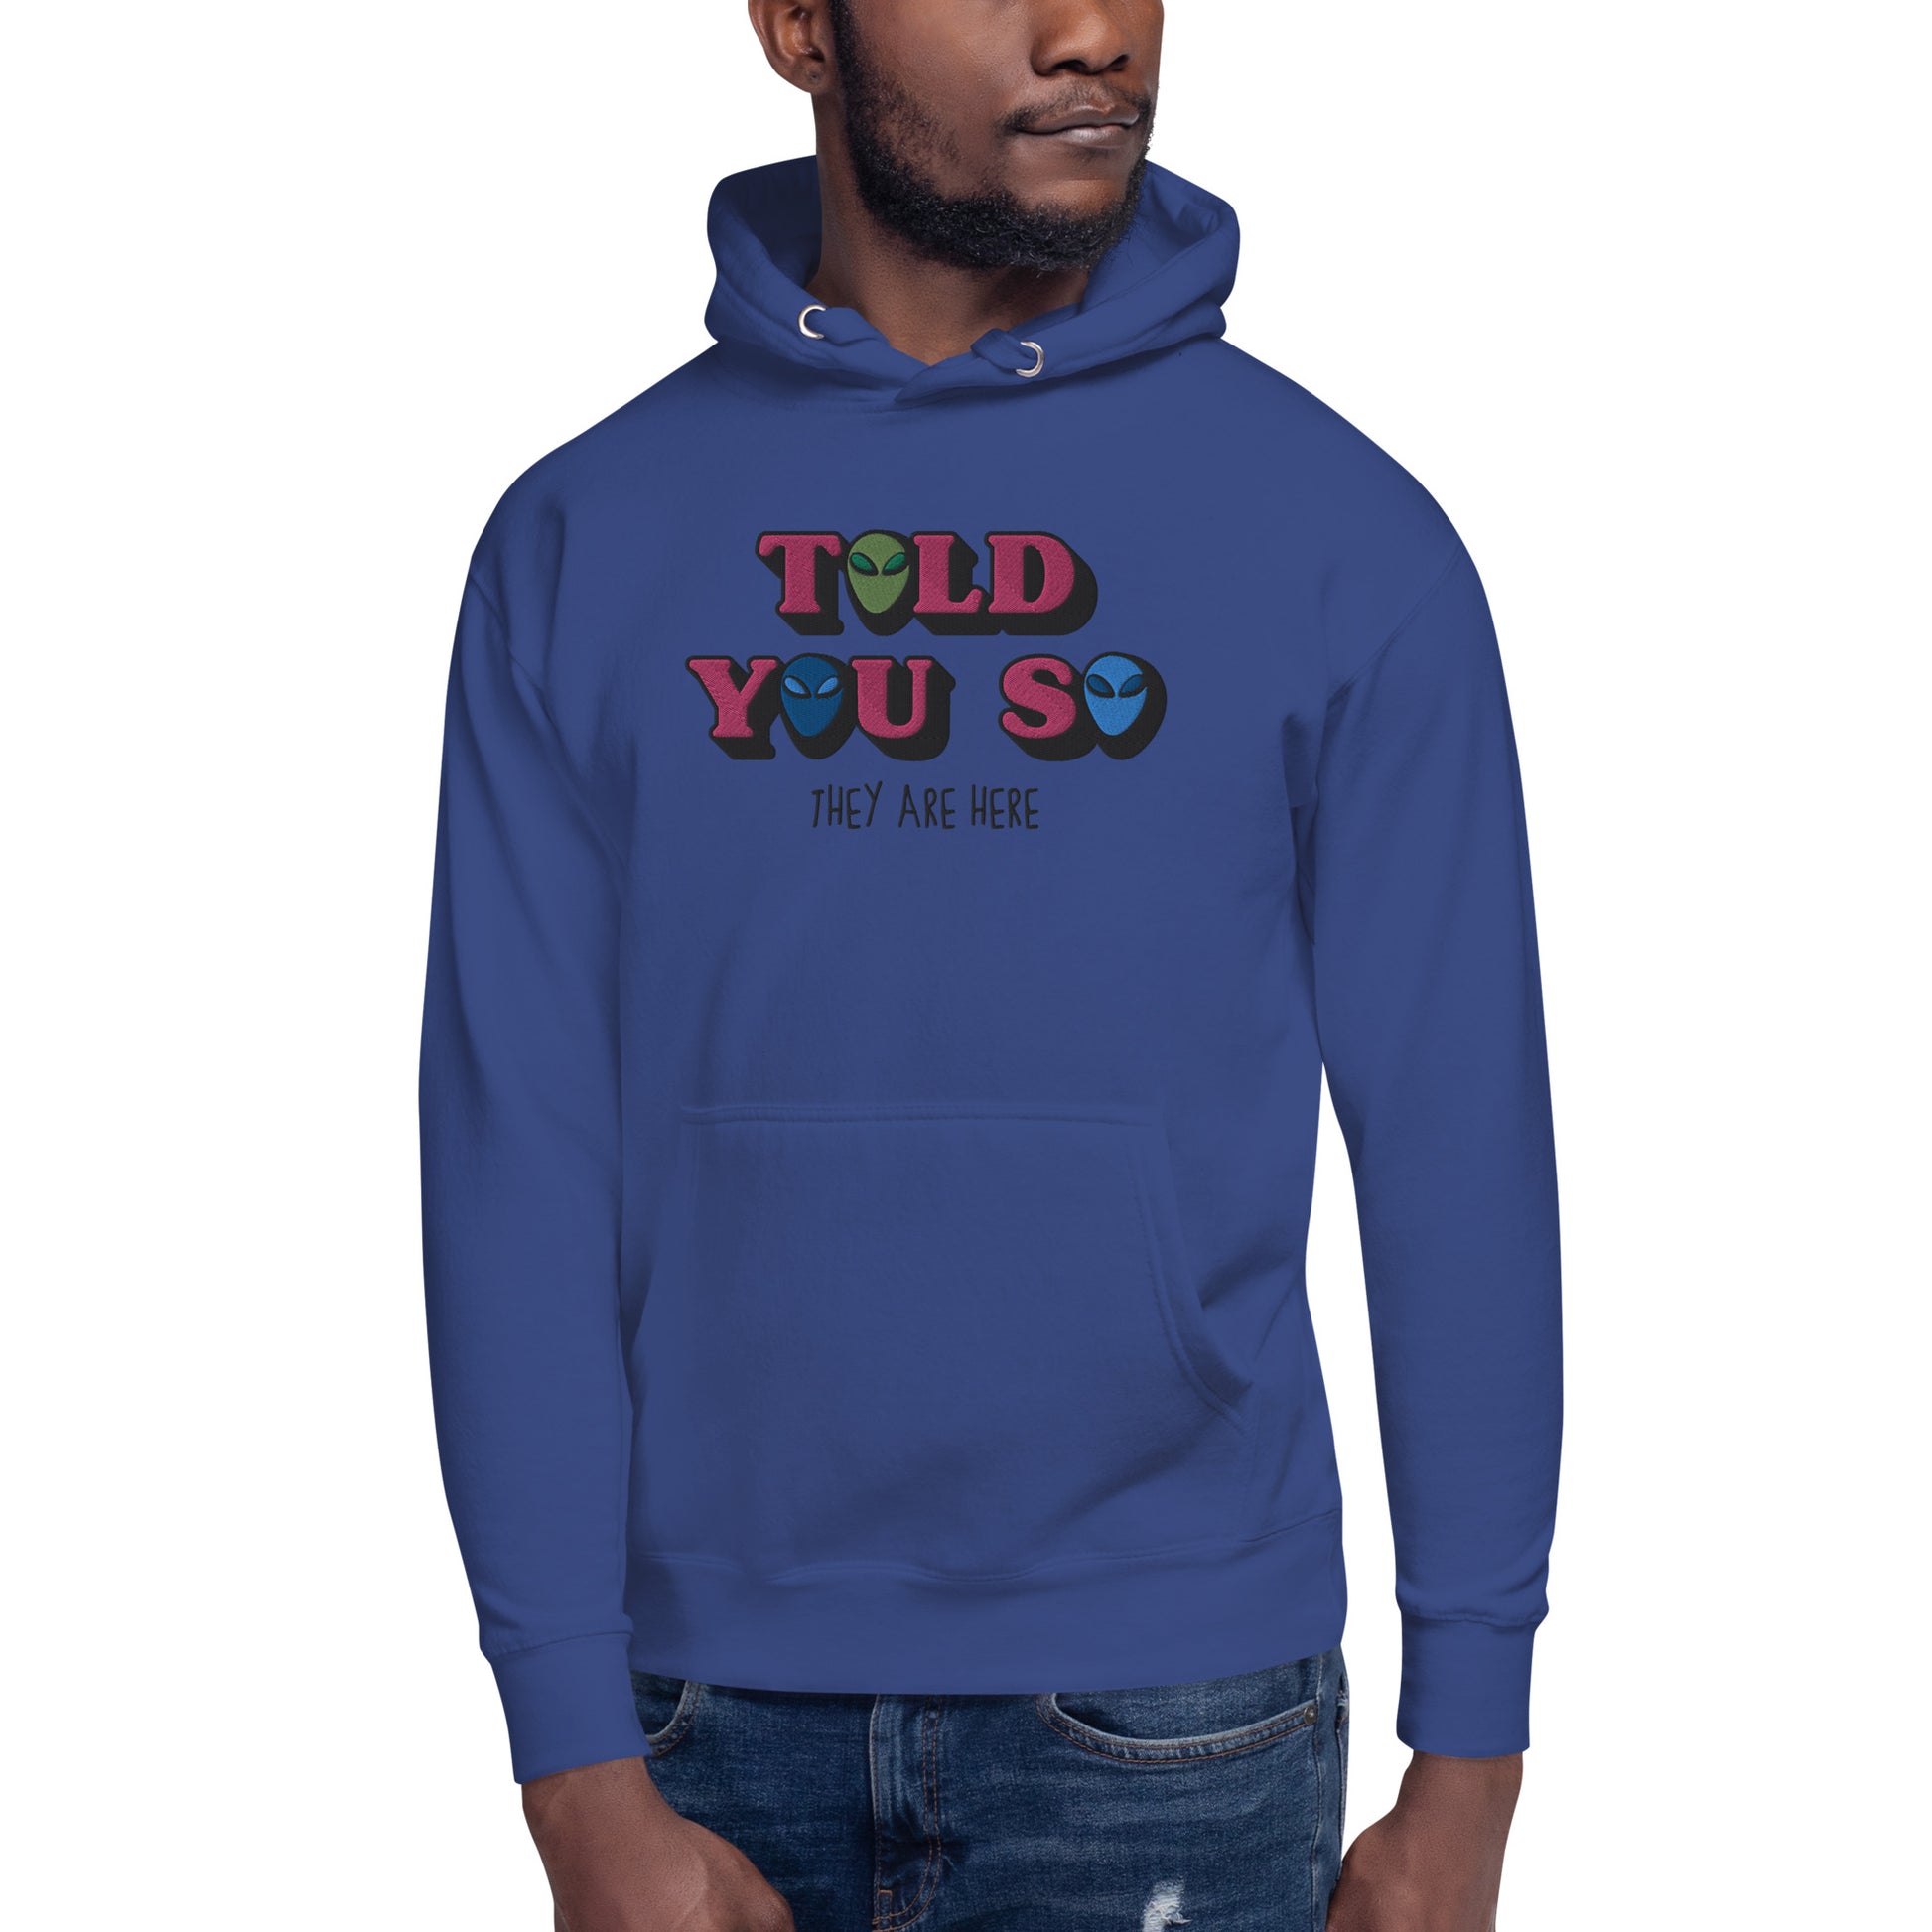 WEIRDO | Are Aliens real? Of course they are! and they are here! Get ready with this purple/blue hoodie! This hoodie has the embroidery meme: TOLD YOU SO and THEY ARE HERE!